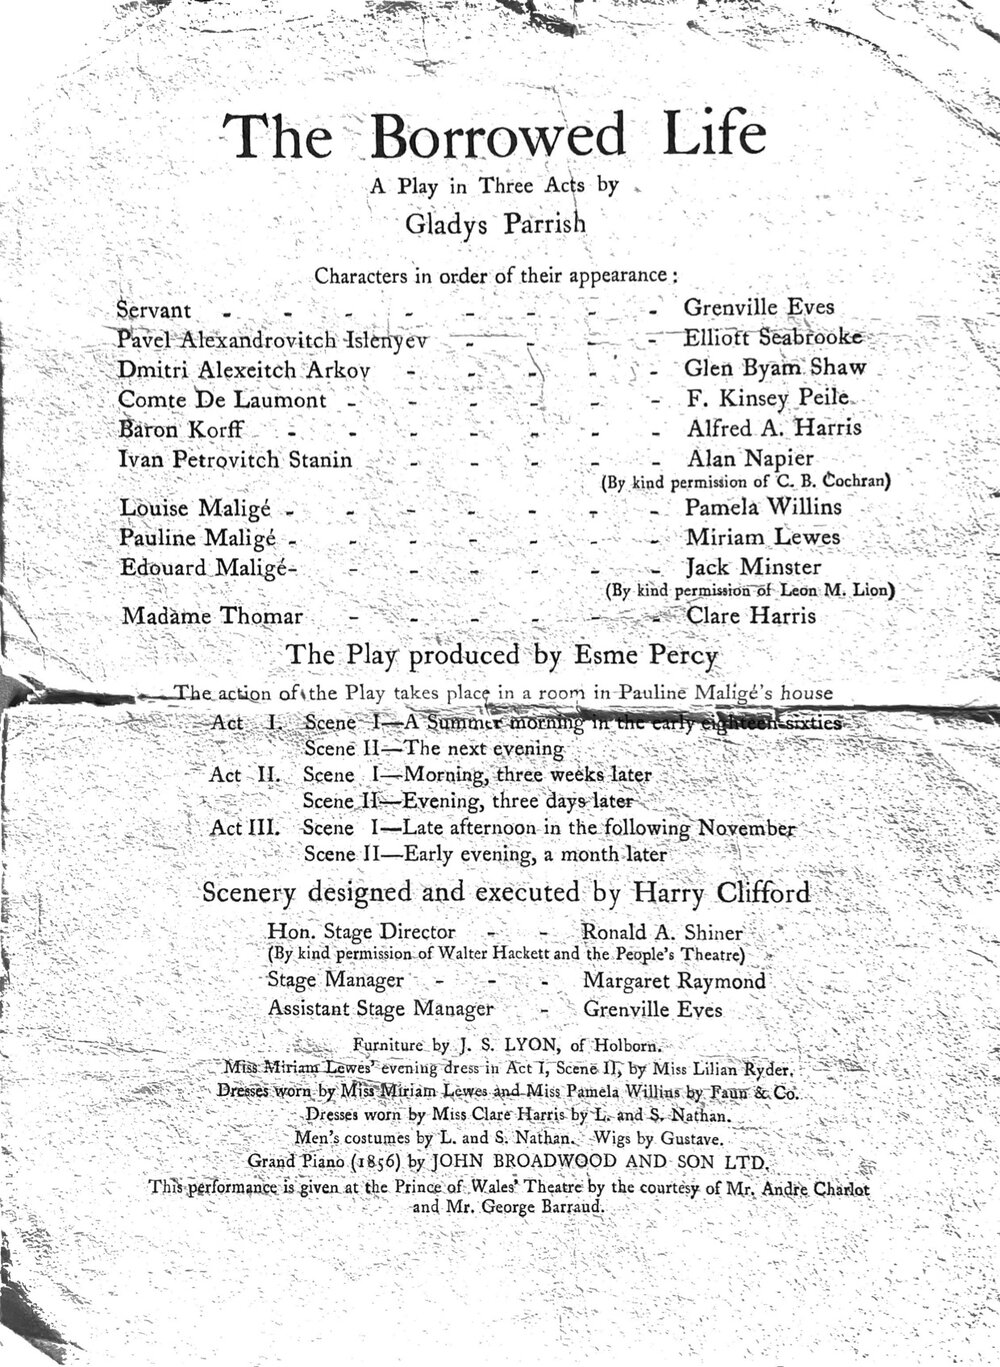 Page 2 of the Playbill for "The Borrowed Life"